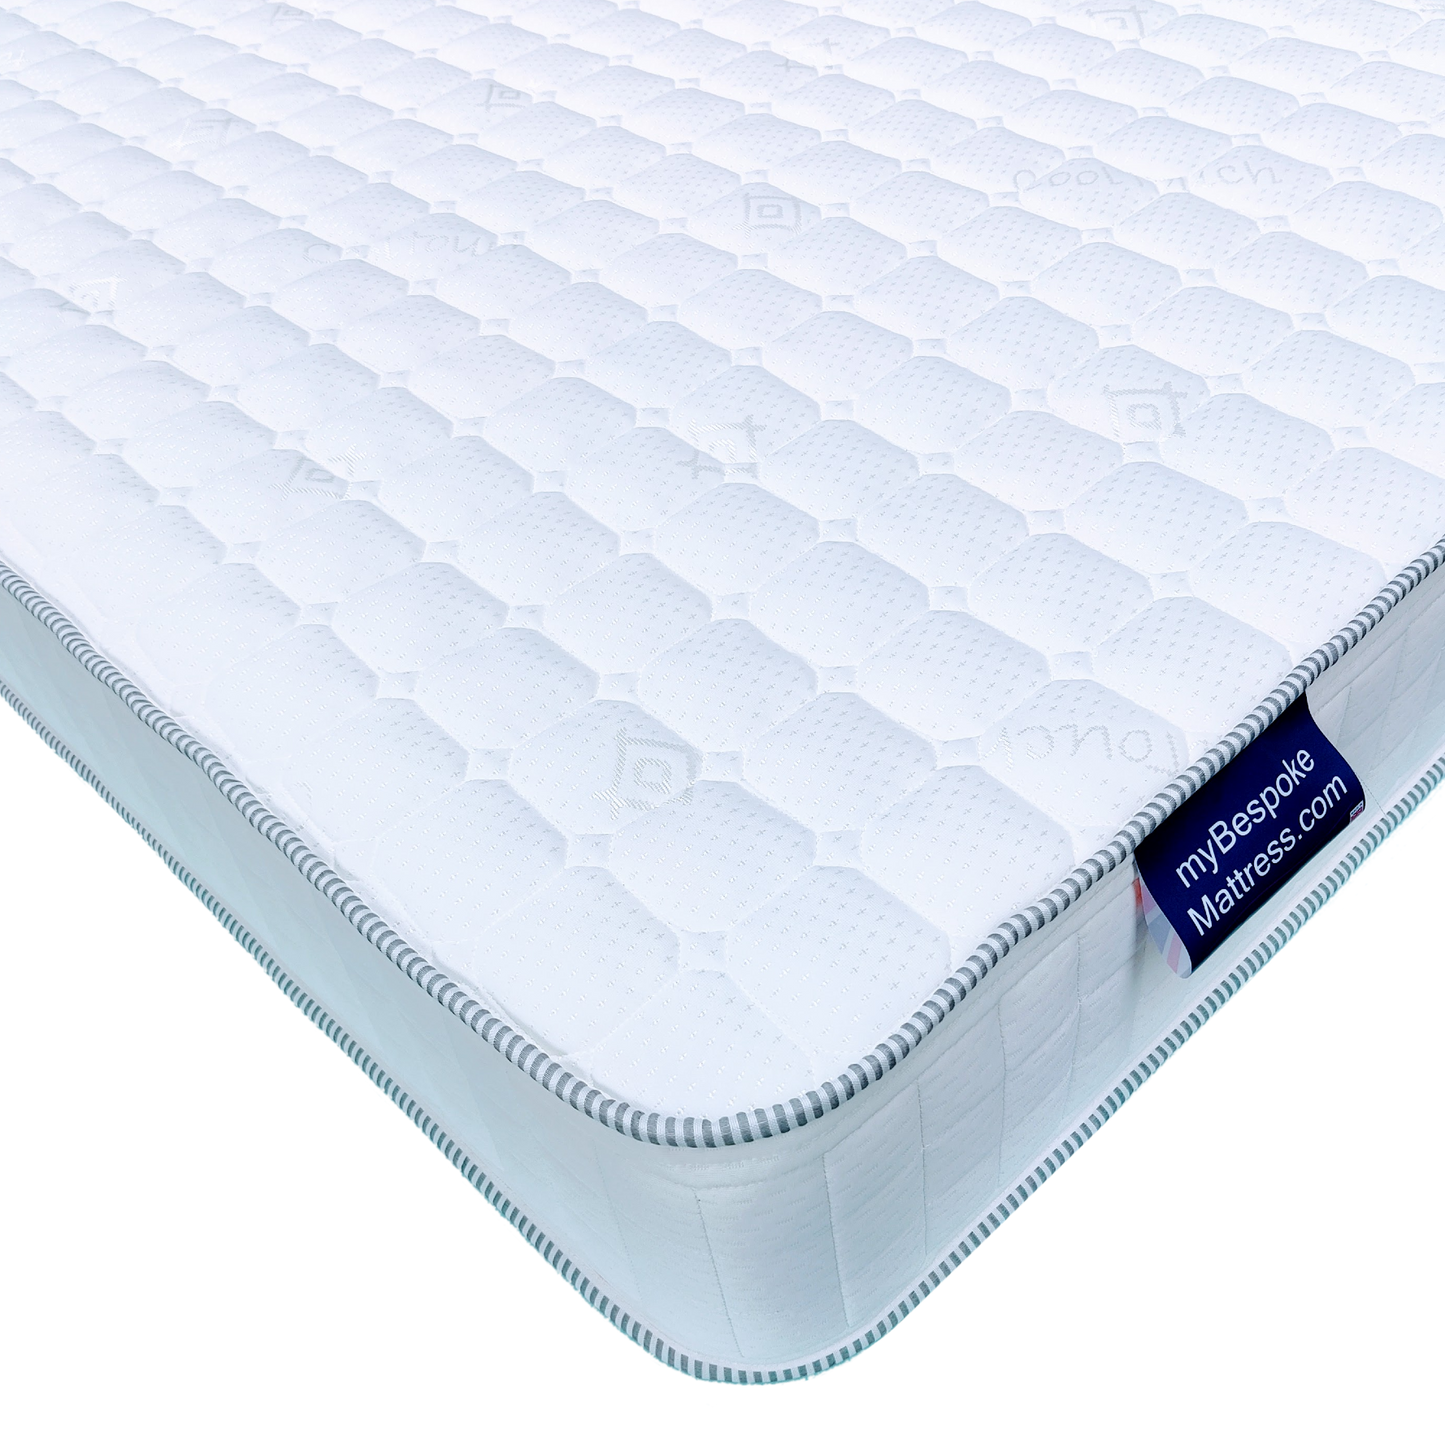 Curved-Corner Mattress with Offside Angled Cut